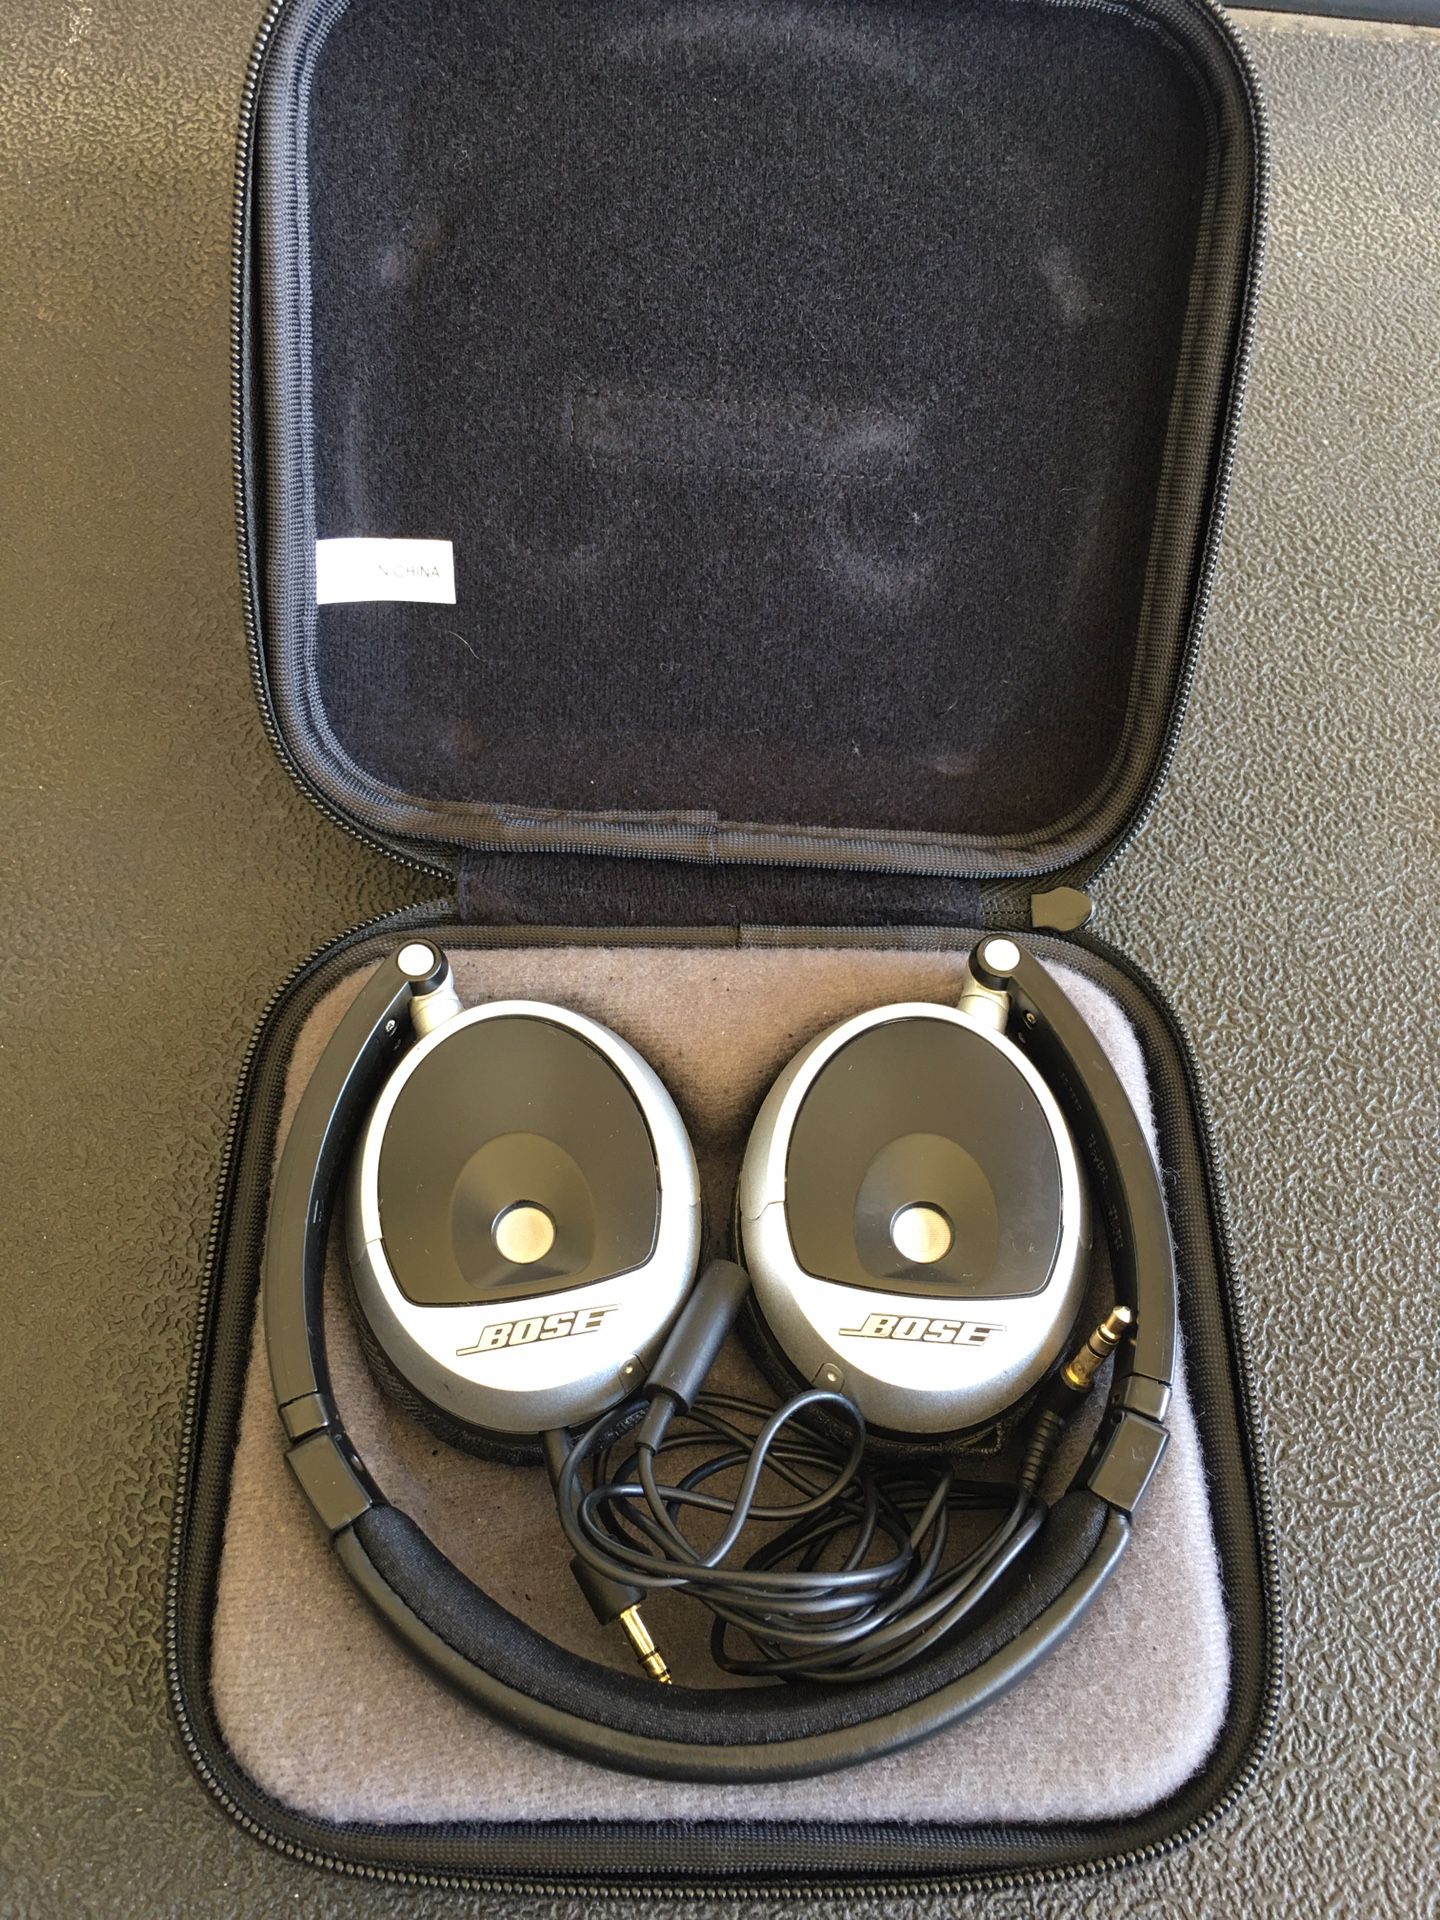 Bose headphones not wireless but works great $25